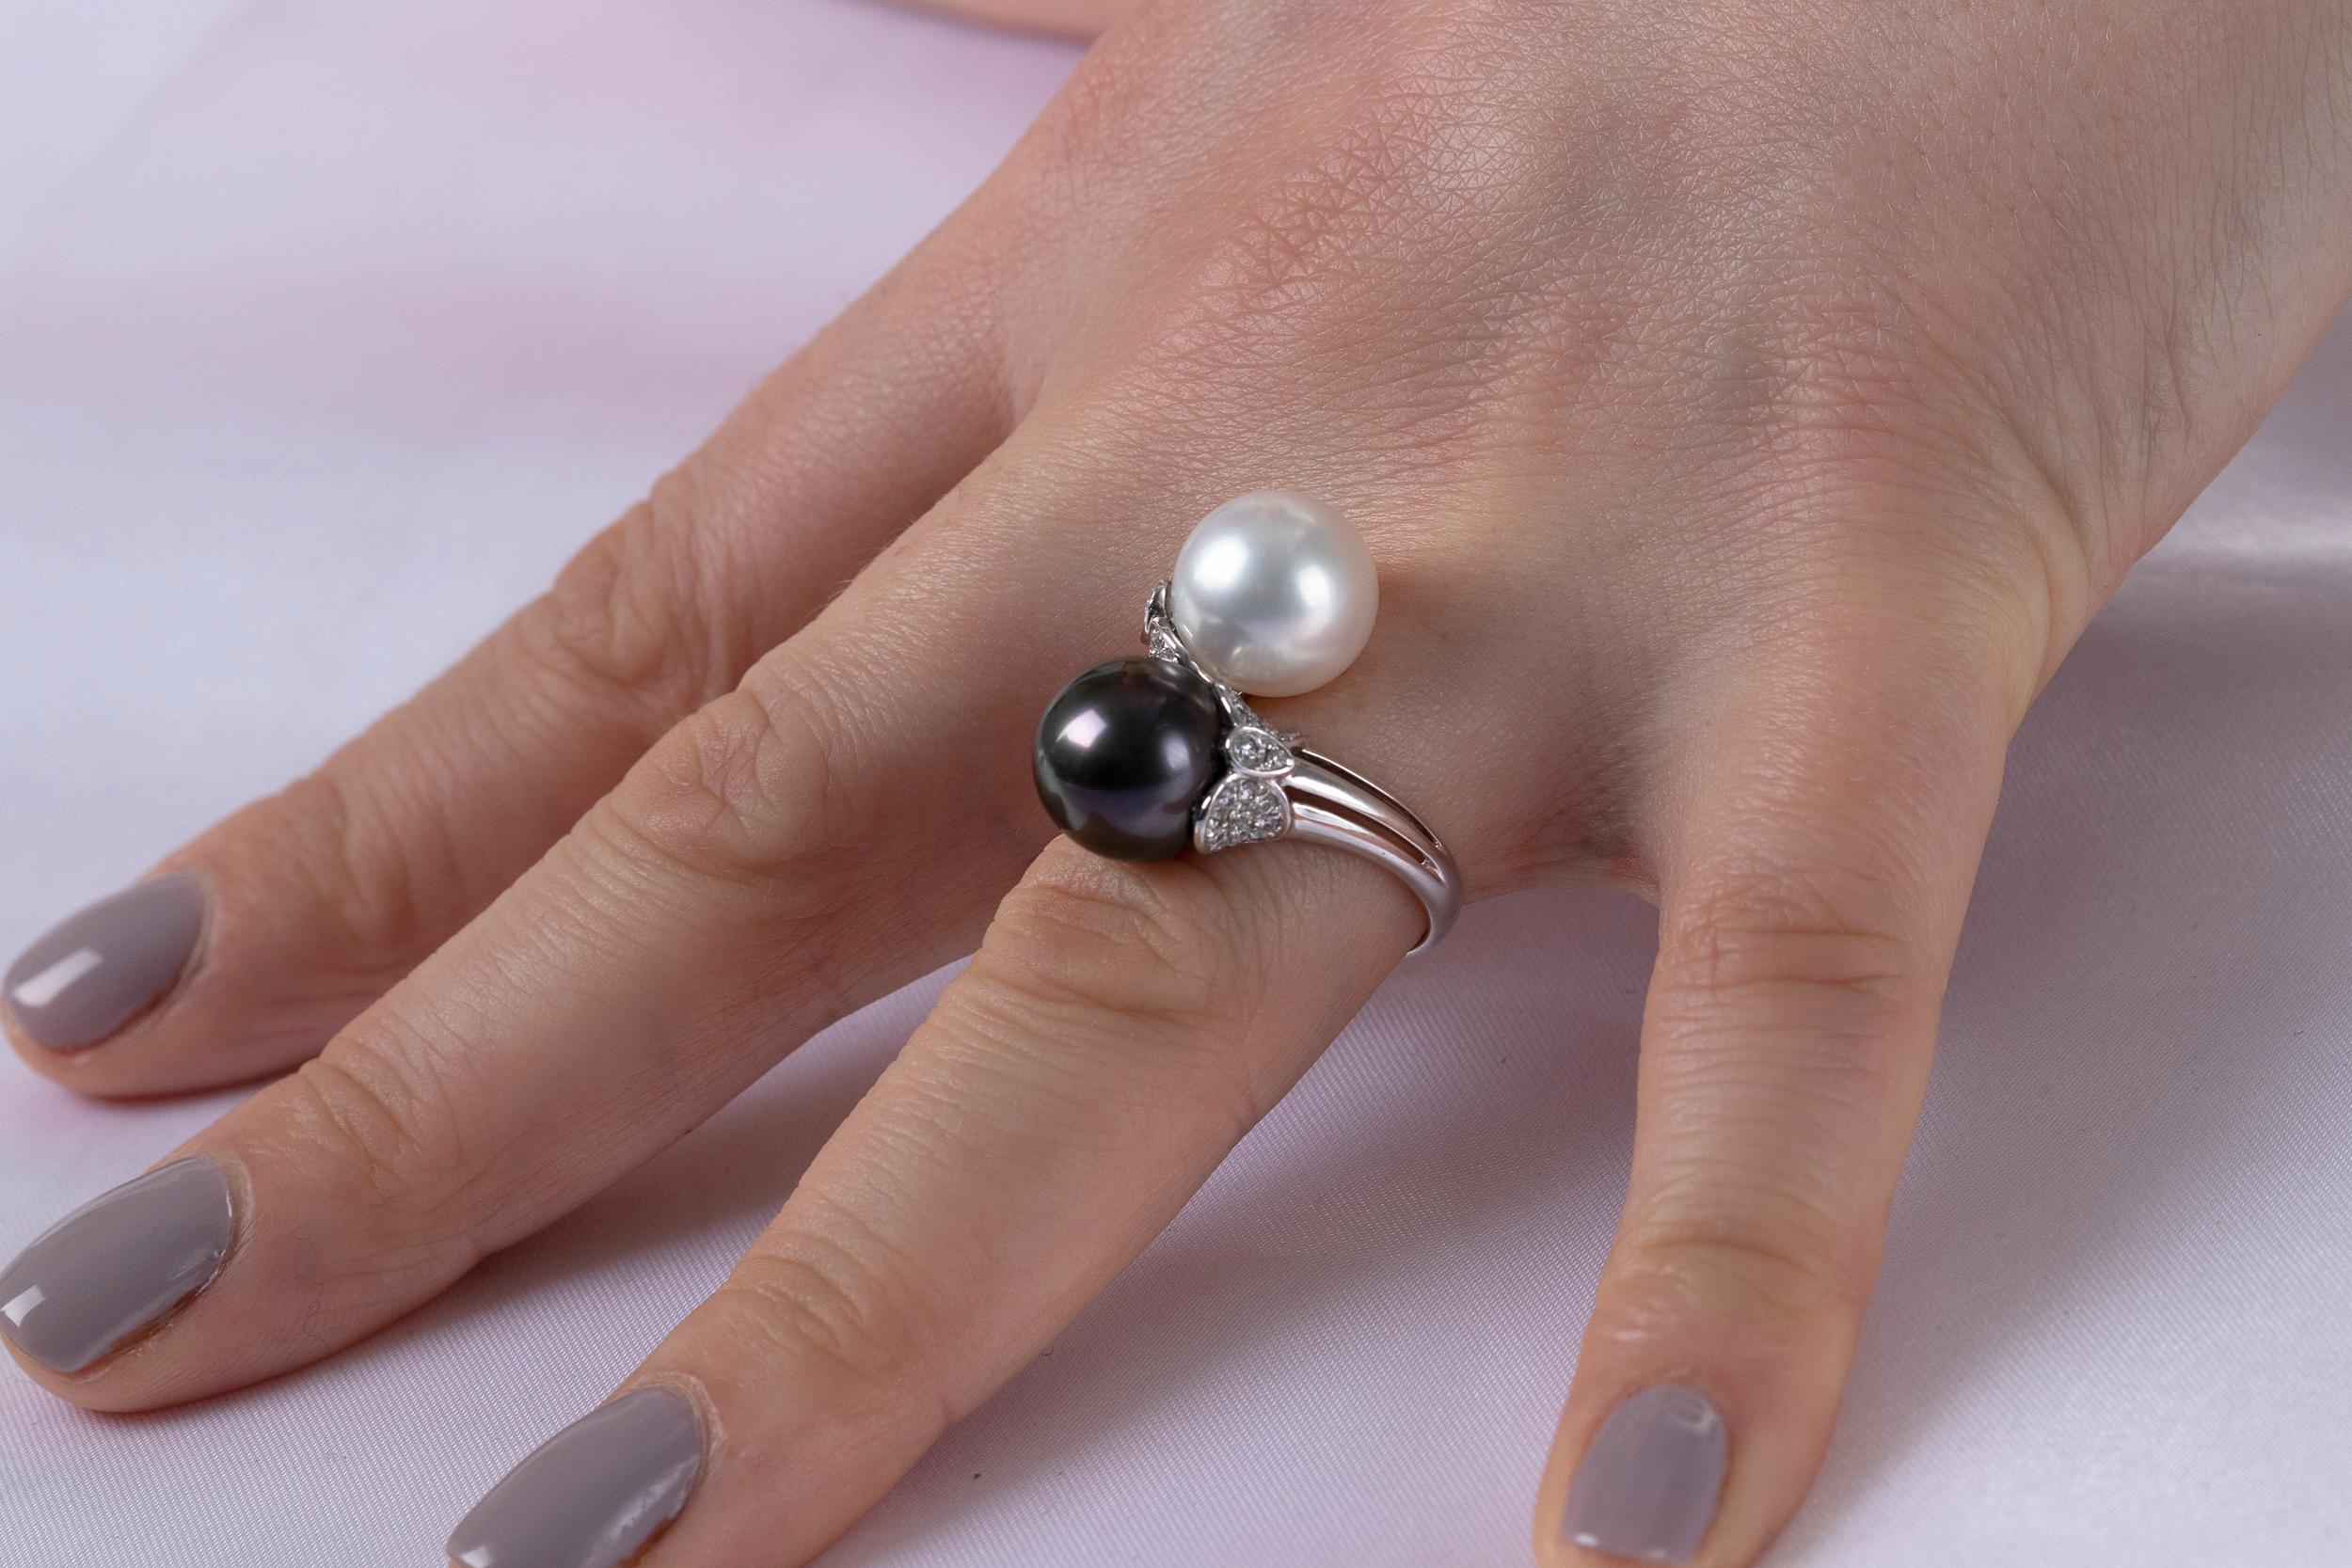 Inspired by the beauty of the night, each piece in the Yoko London Twilight collection showcases the mysterious elegance of dark-toned gems. Featuring an 11-12mm Tahitian and South Sea pearl designed to elegantly rest upon the finger, combine this